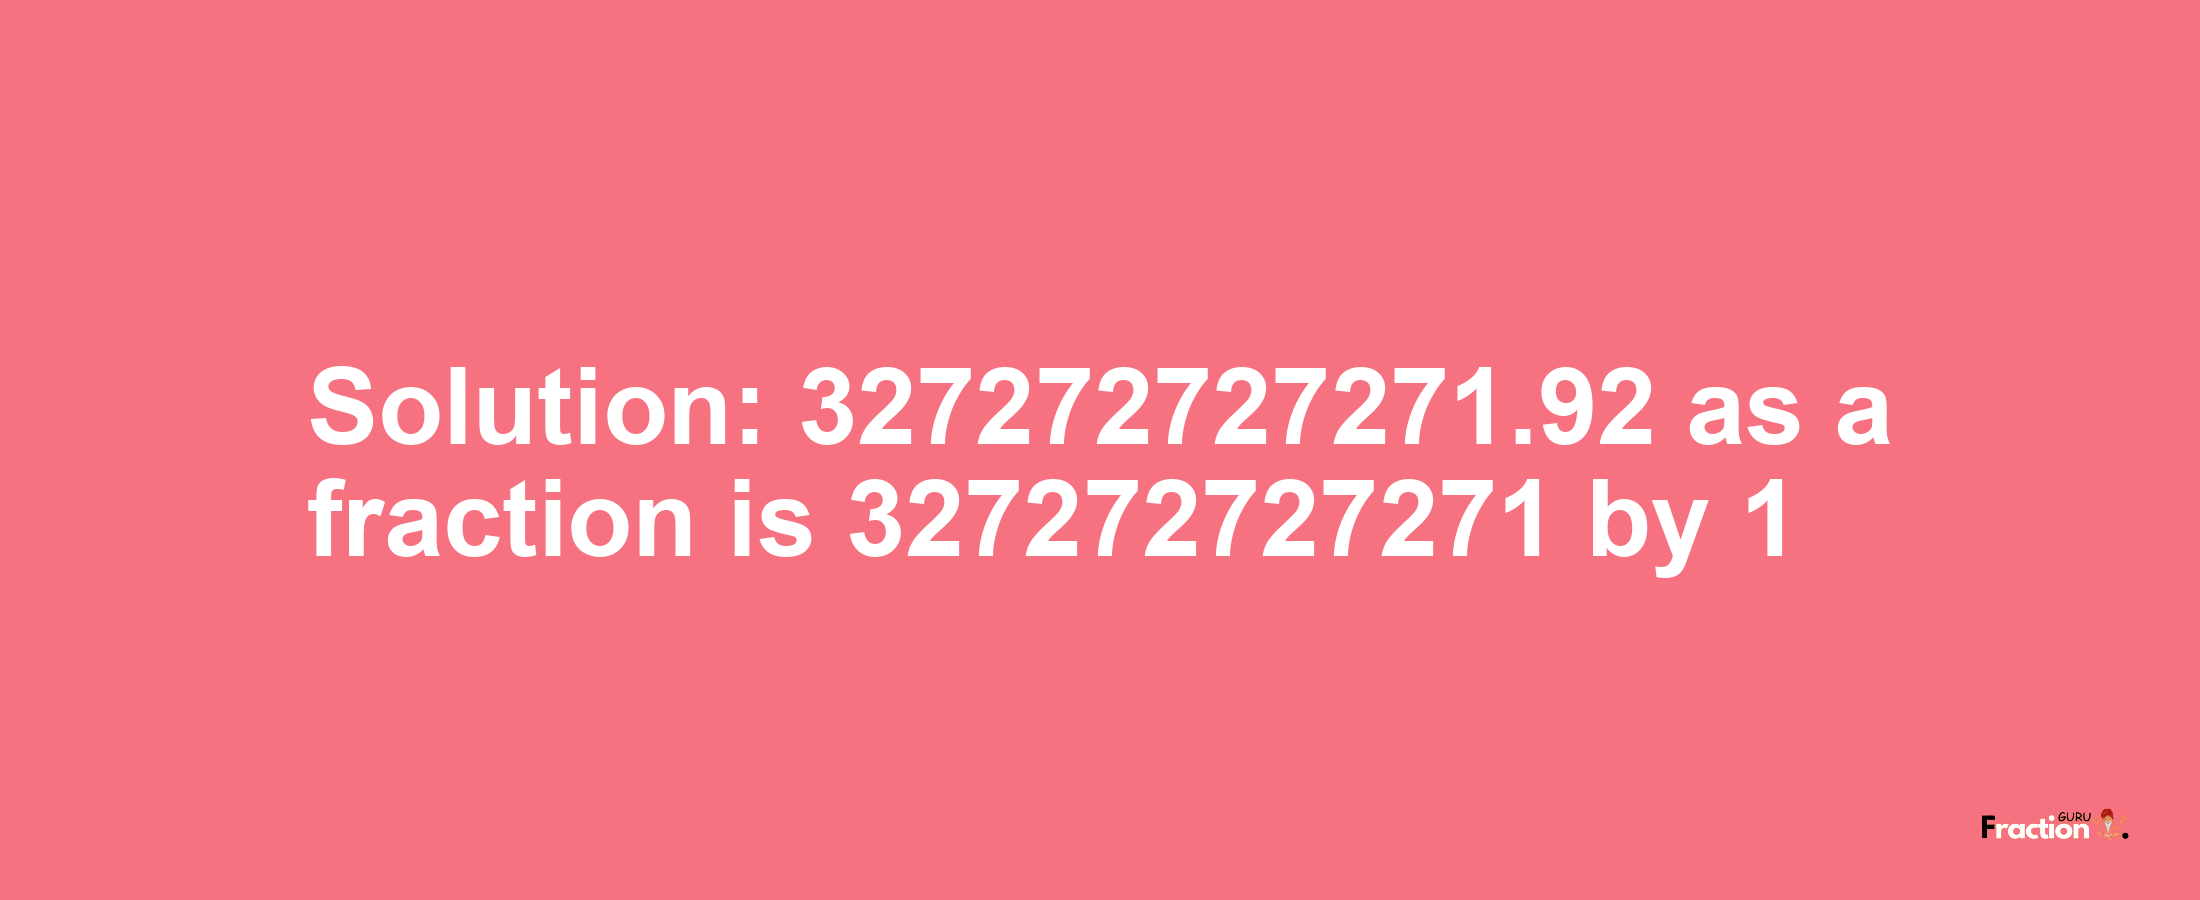 Solution:327272727271.92 as a fraction is 327272727271/1